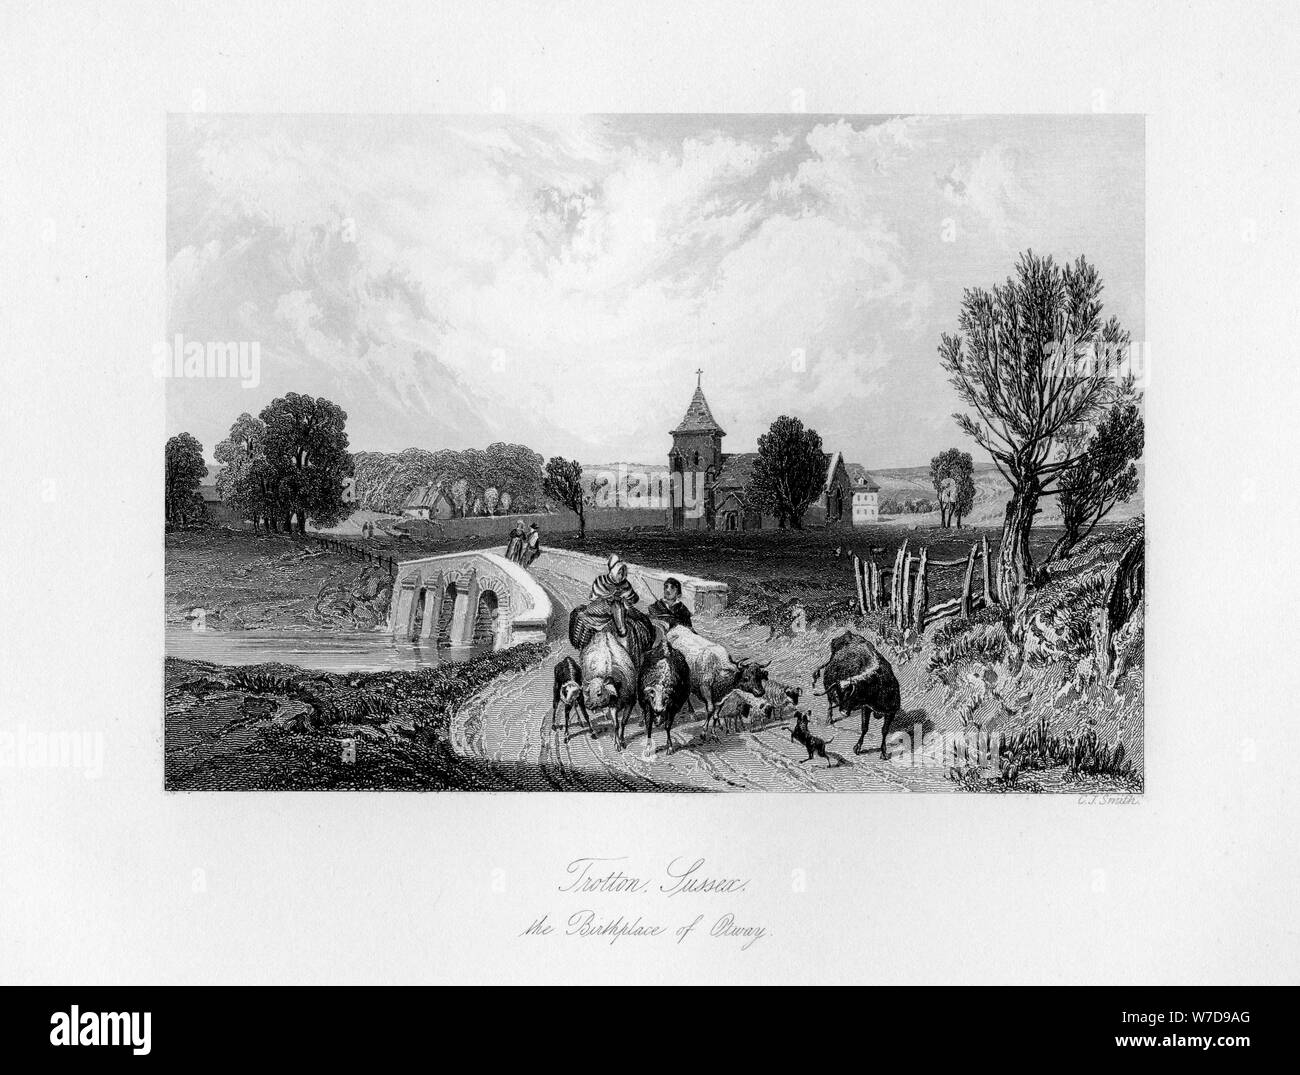 Trotton, Syssex, the birth place of Otway, 1840. Artist: C J Smith Stock Photo